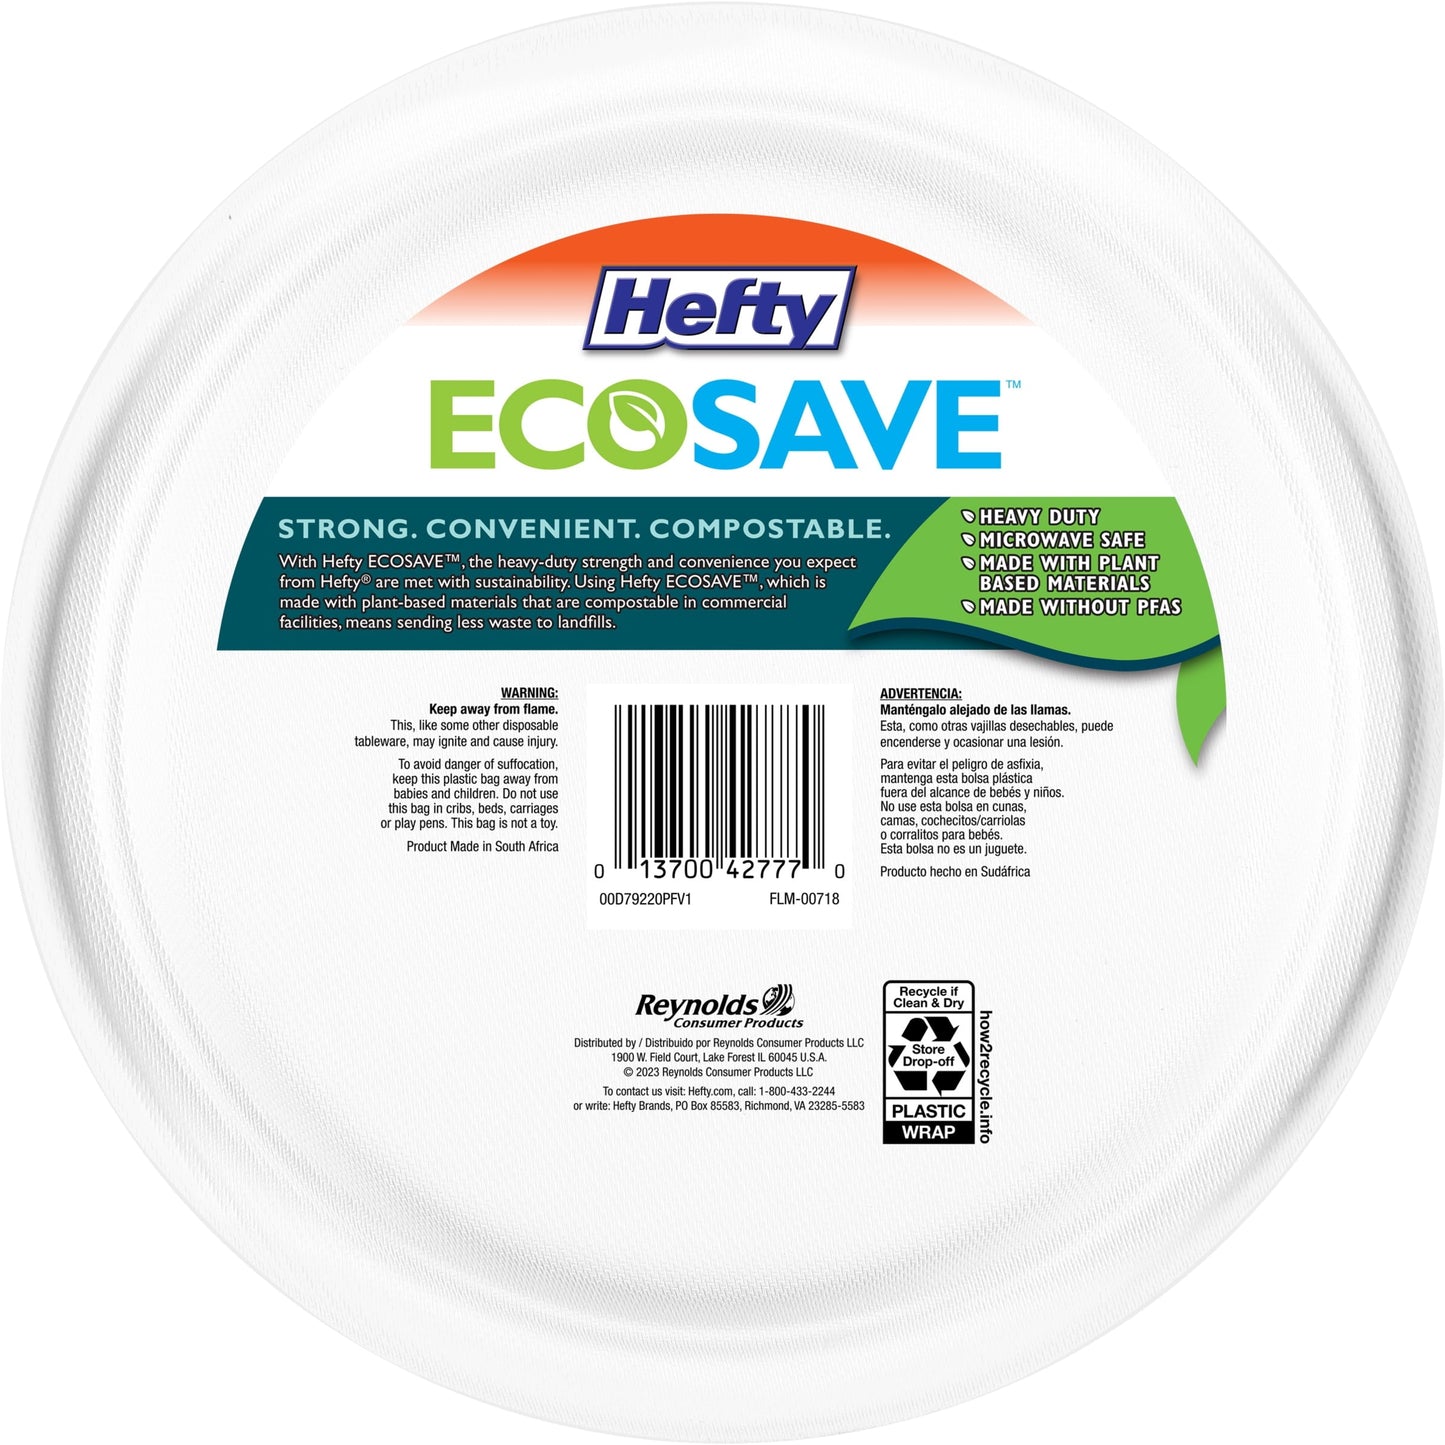 Hefty ECOSAVE Compostable Paper Plates, 8-3/4 inch, 22 Count